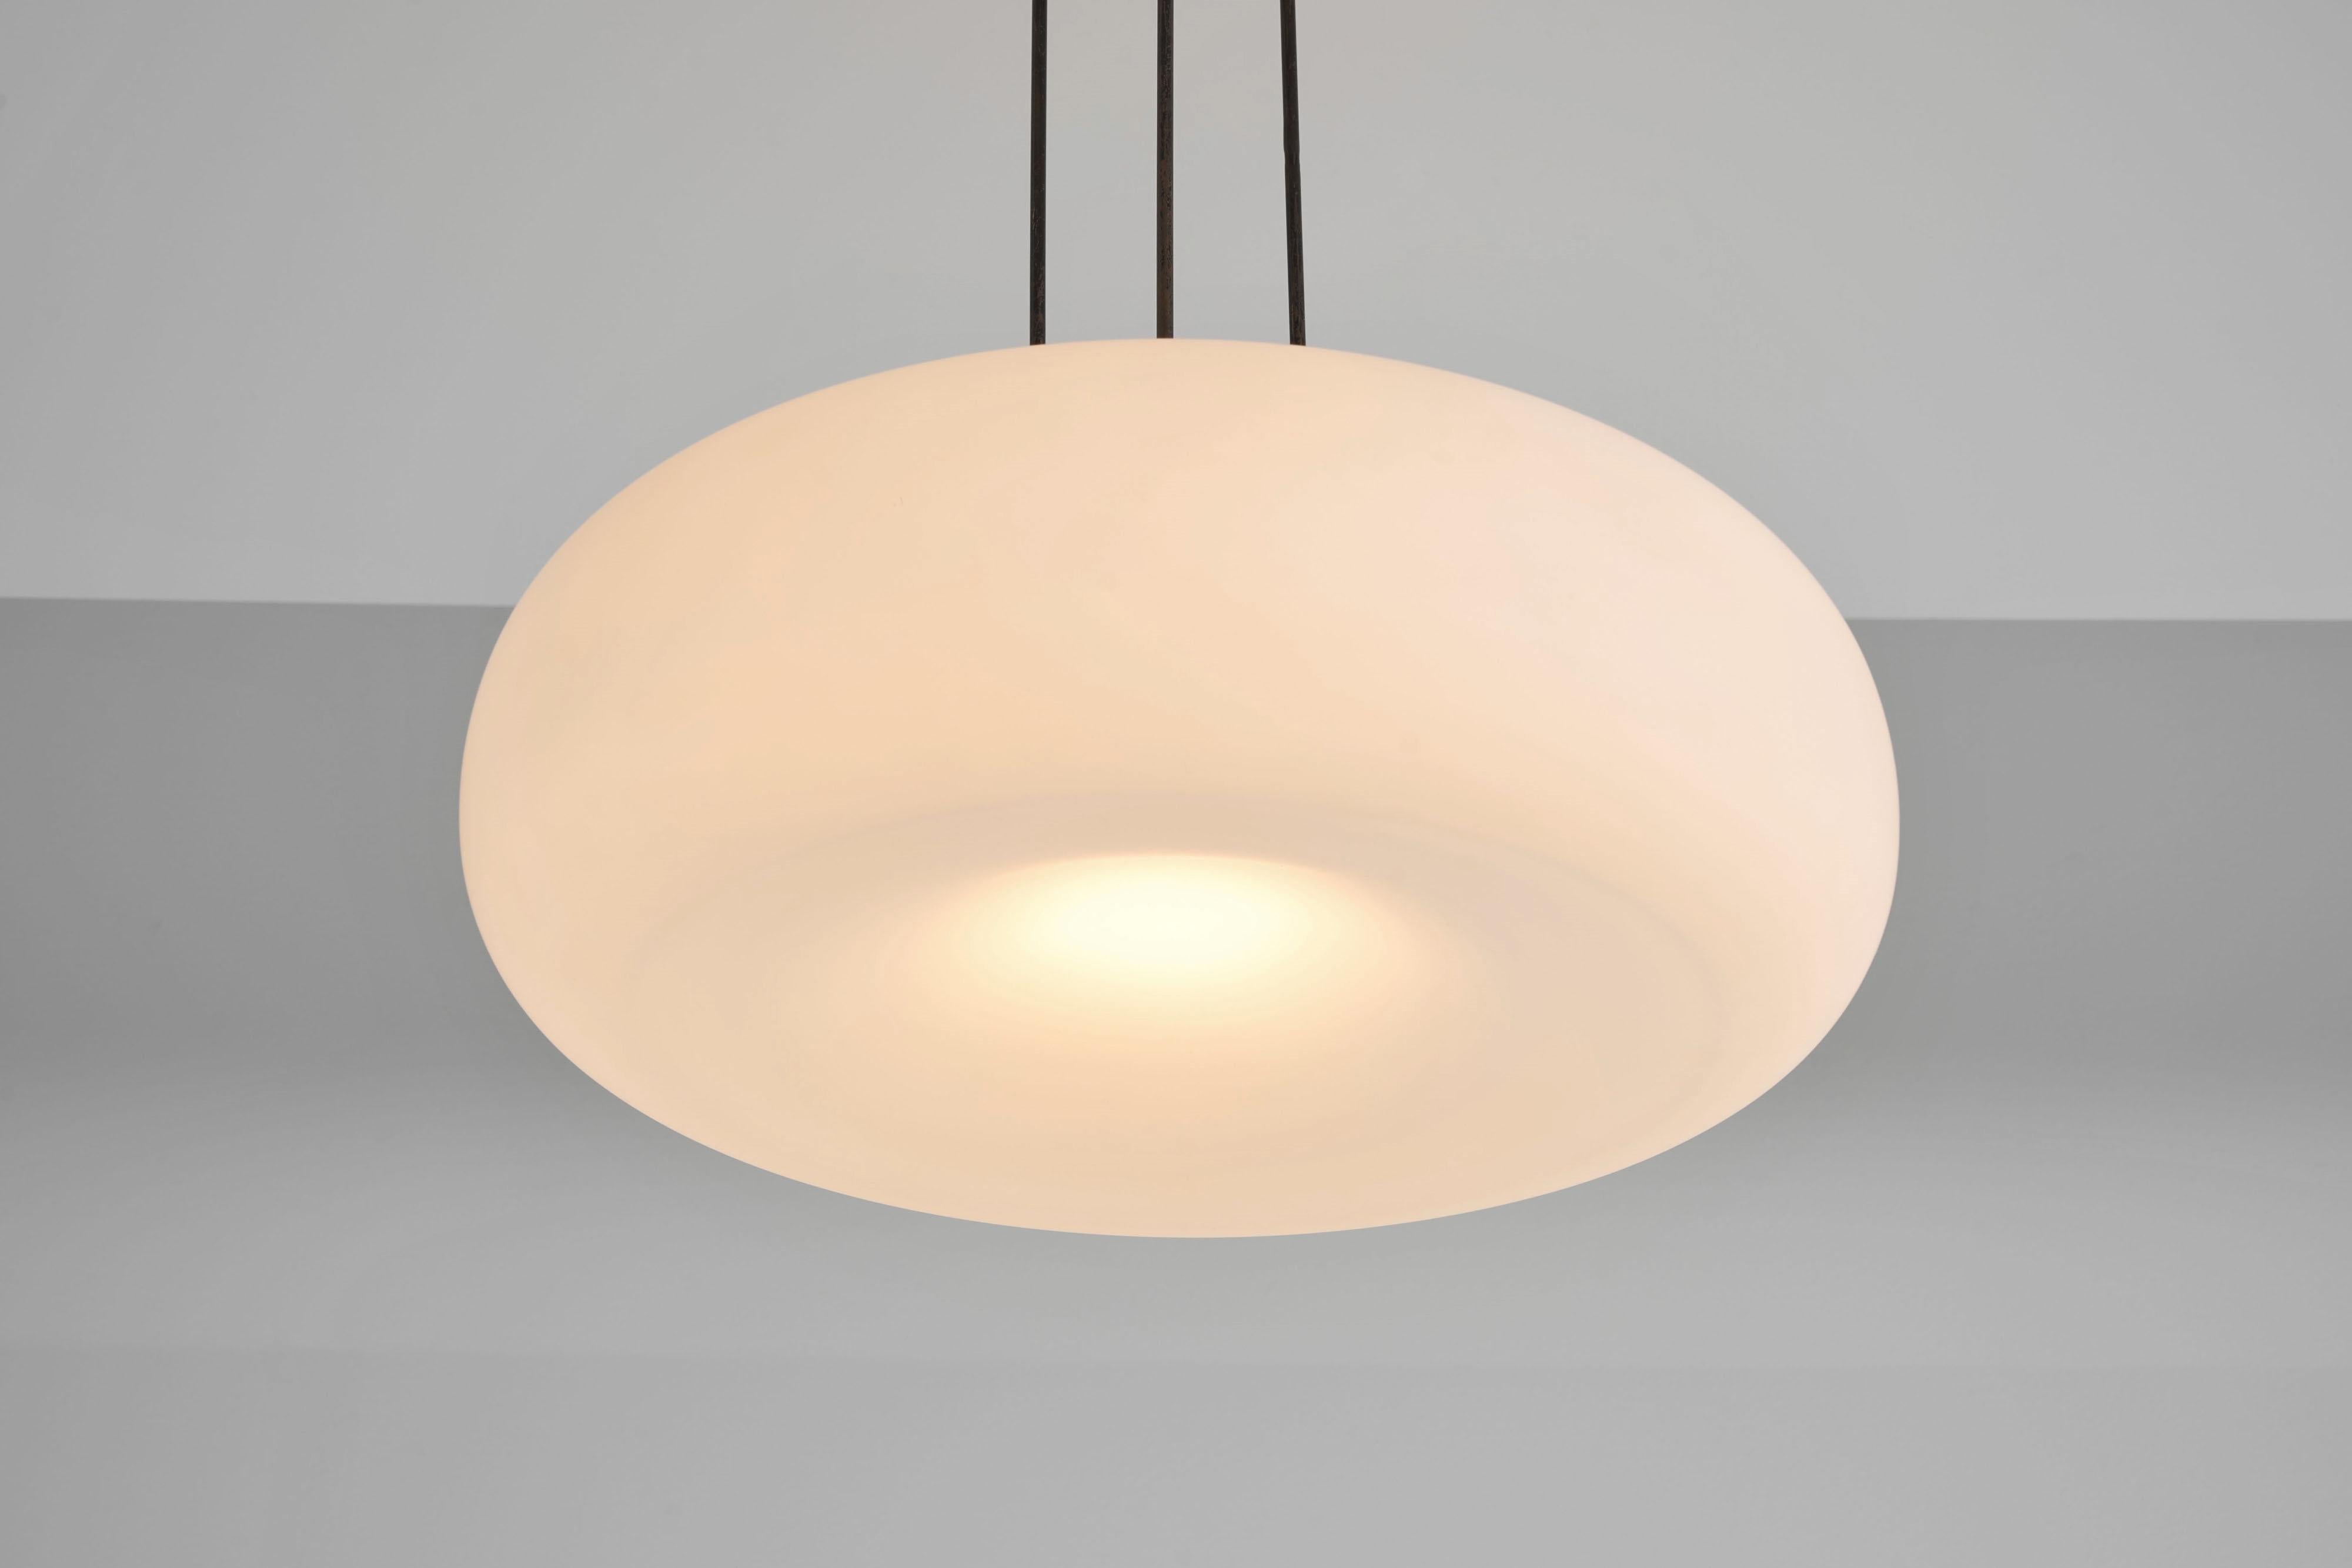 Unique ceiling light designed by Max Ingrand for Fontana Arte. It features a matt milk glass shade with a stunning inner blown shade, resembling a planet in its appearance, a really unique and atmospheric sight. The ceiling cap is crafted from